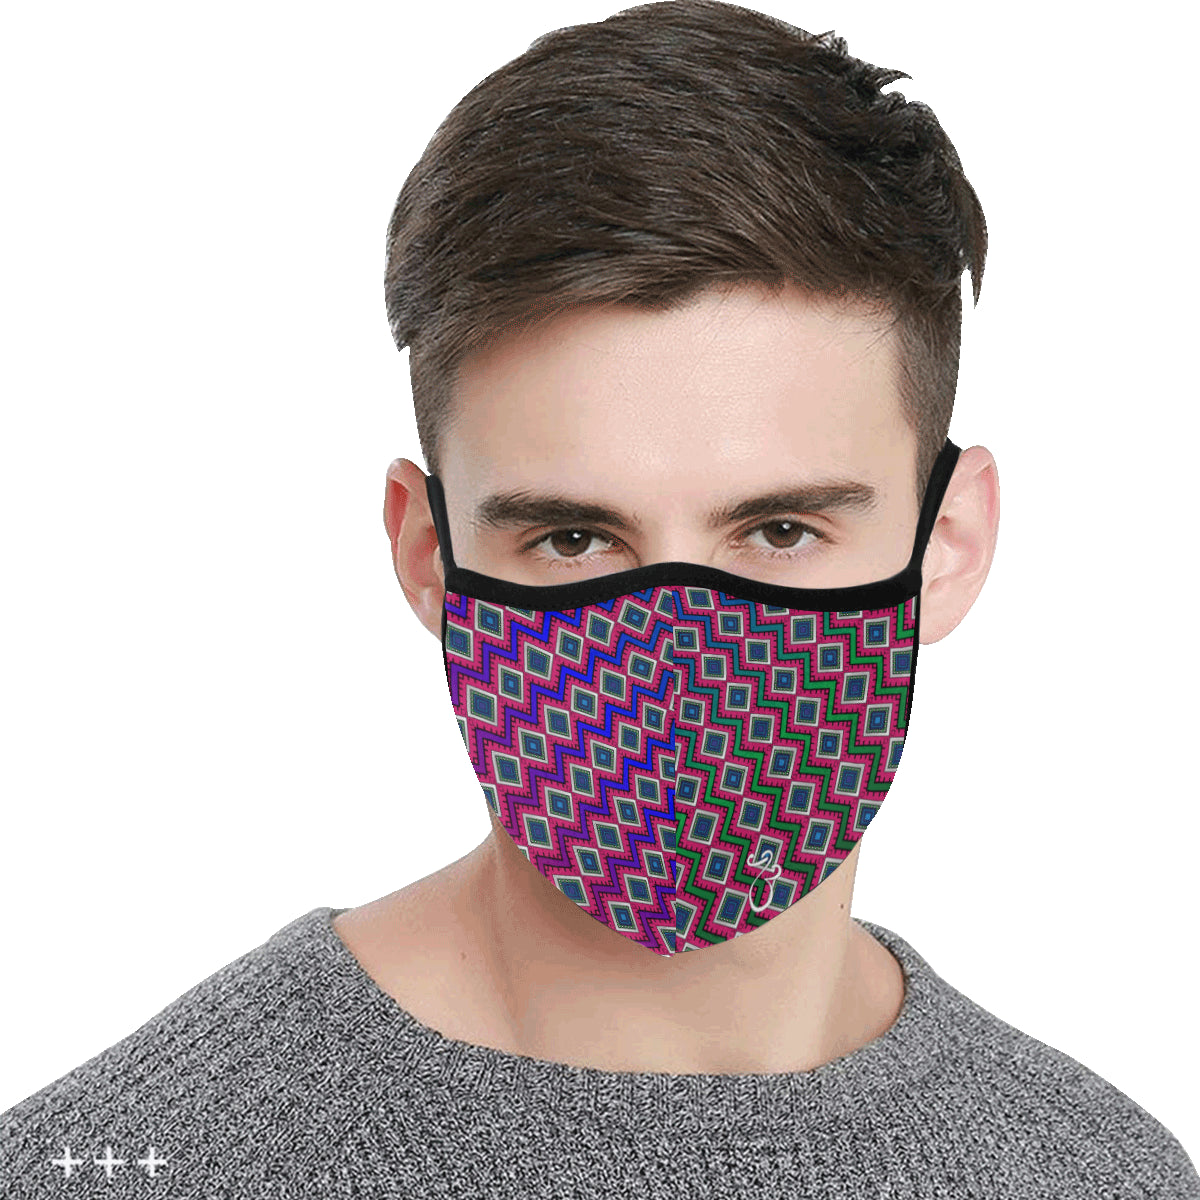 Quadrangle Print Cotton Fabric Face Mask with filter slot (30 Filters Included) - Non-medical use